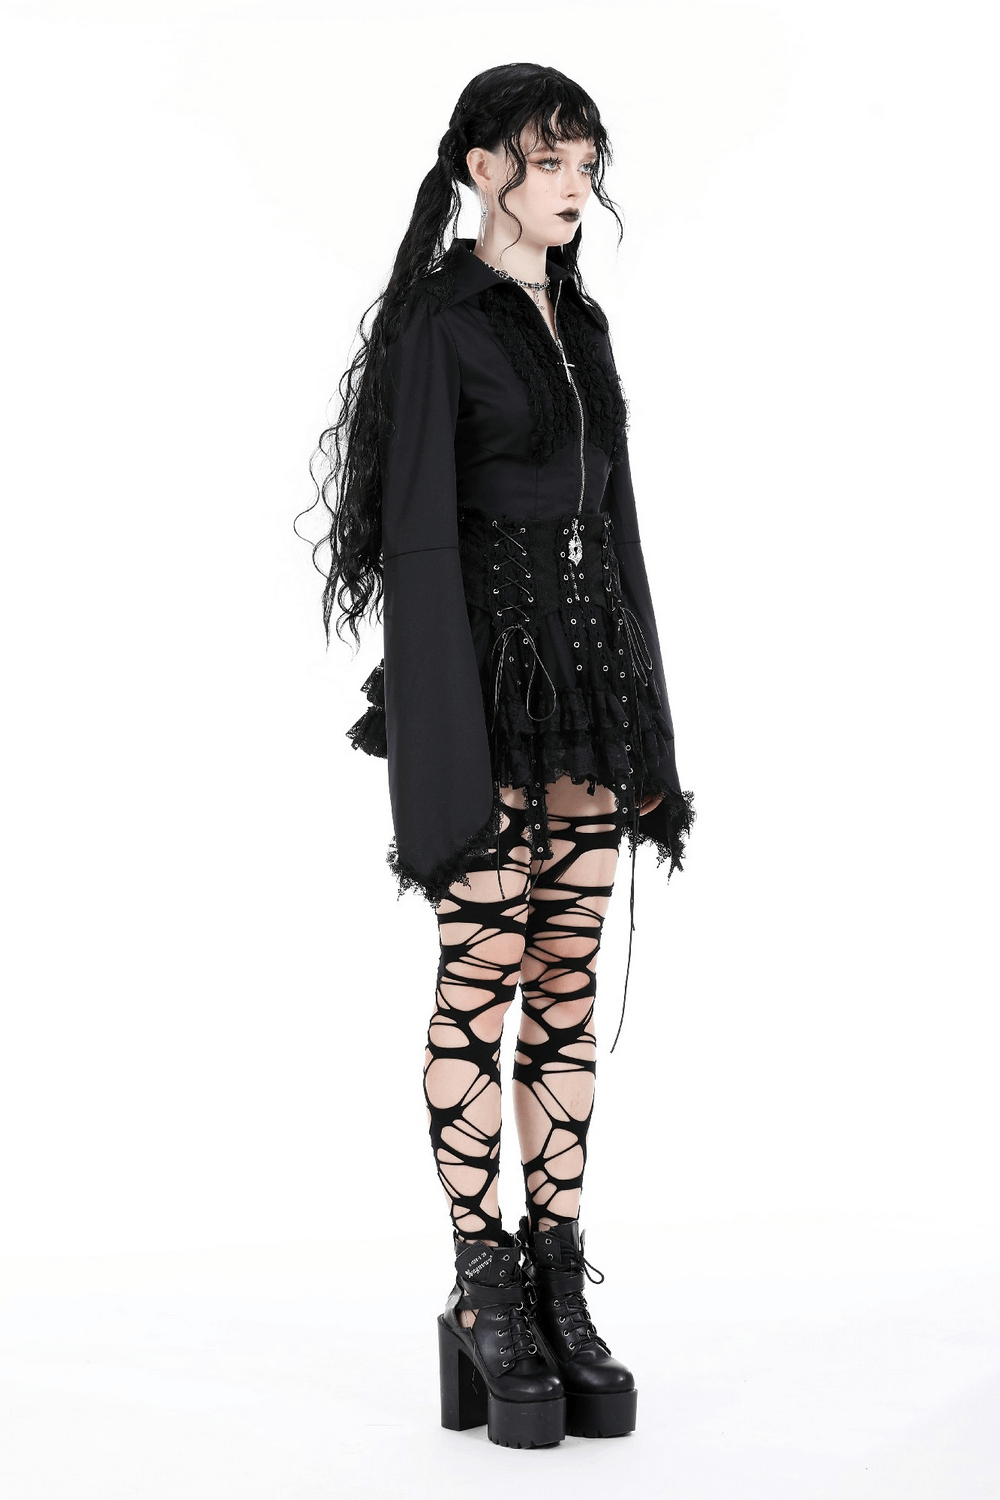 Dark Gothic Mini Skirt with Lace Trim and Cross Detail